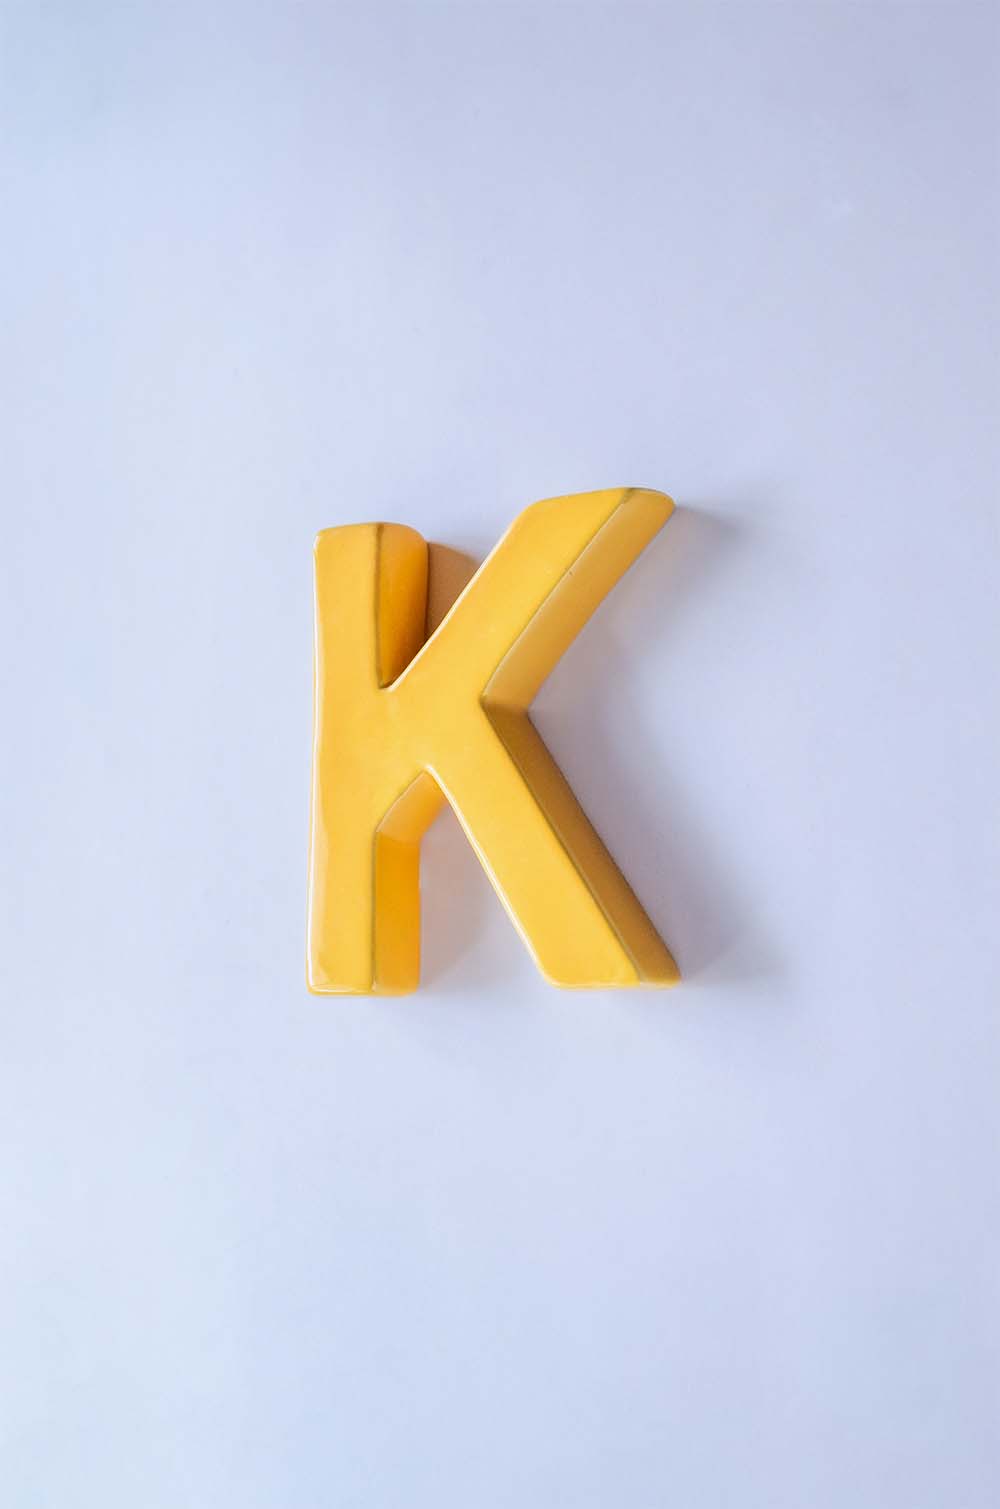 K Mottled Mono Wall Hanging - Mustard A To Z